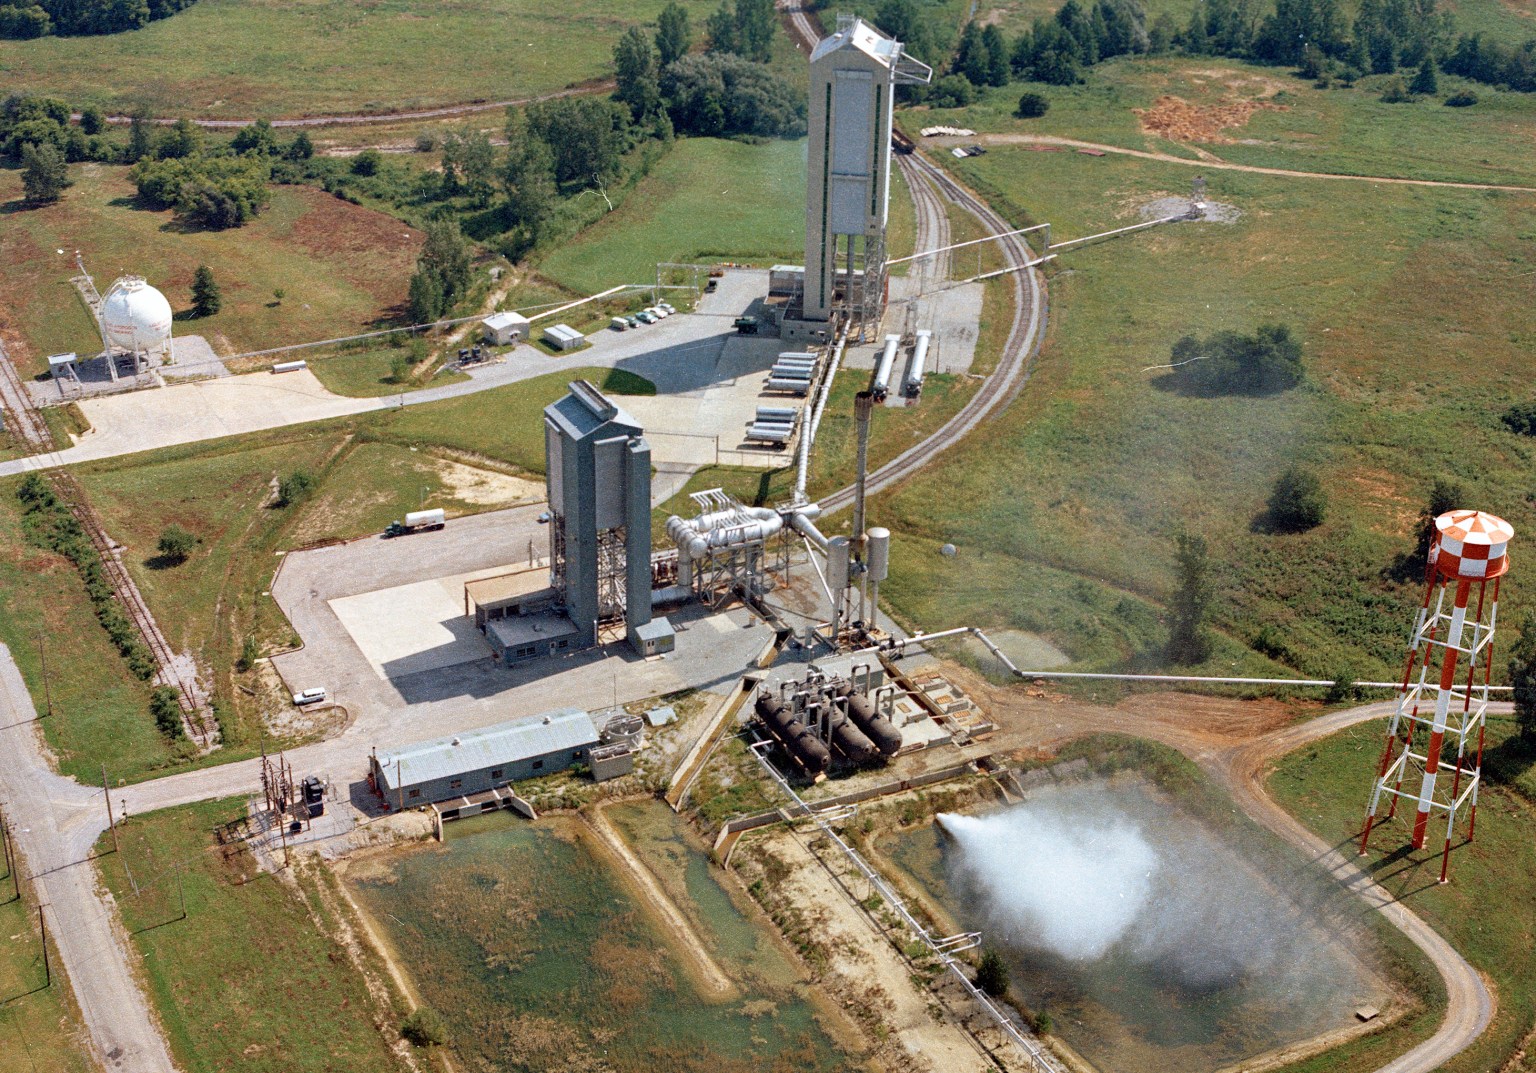 Aerial view of two vertical test stands.